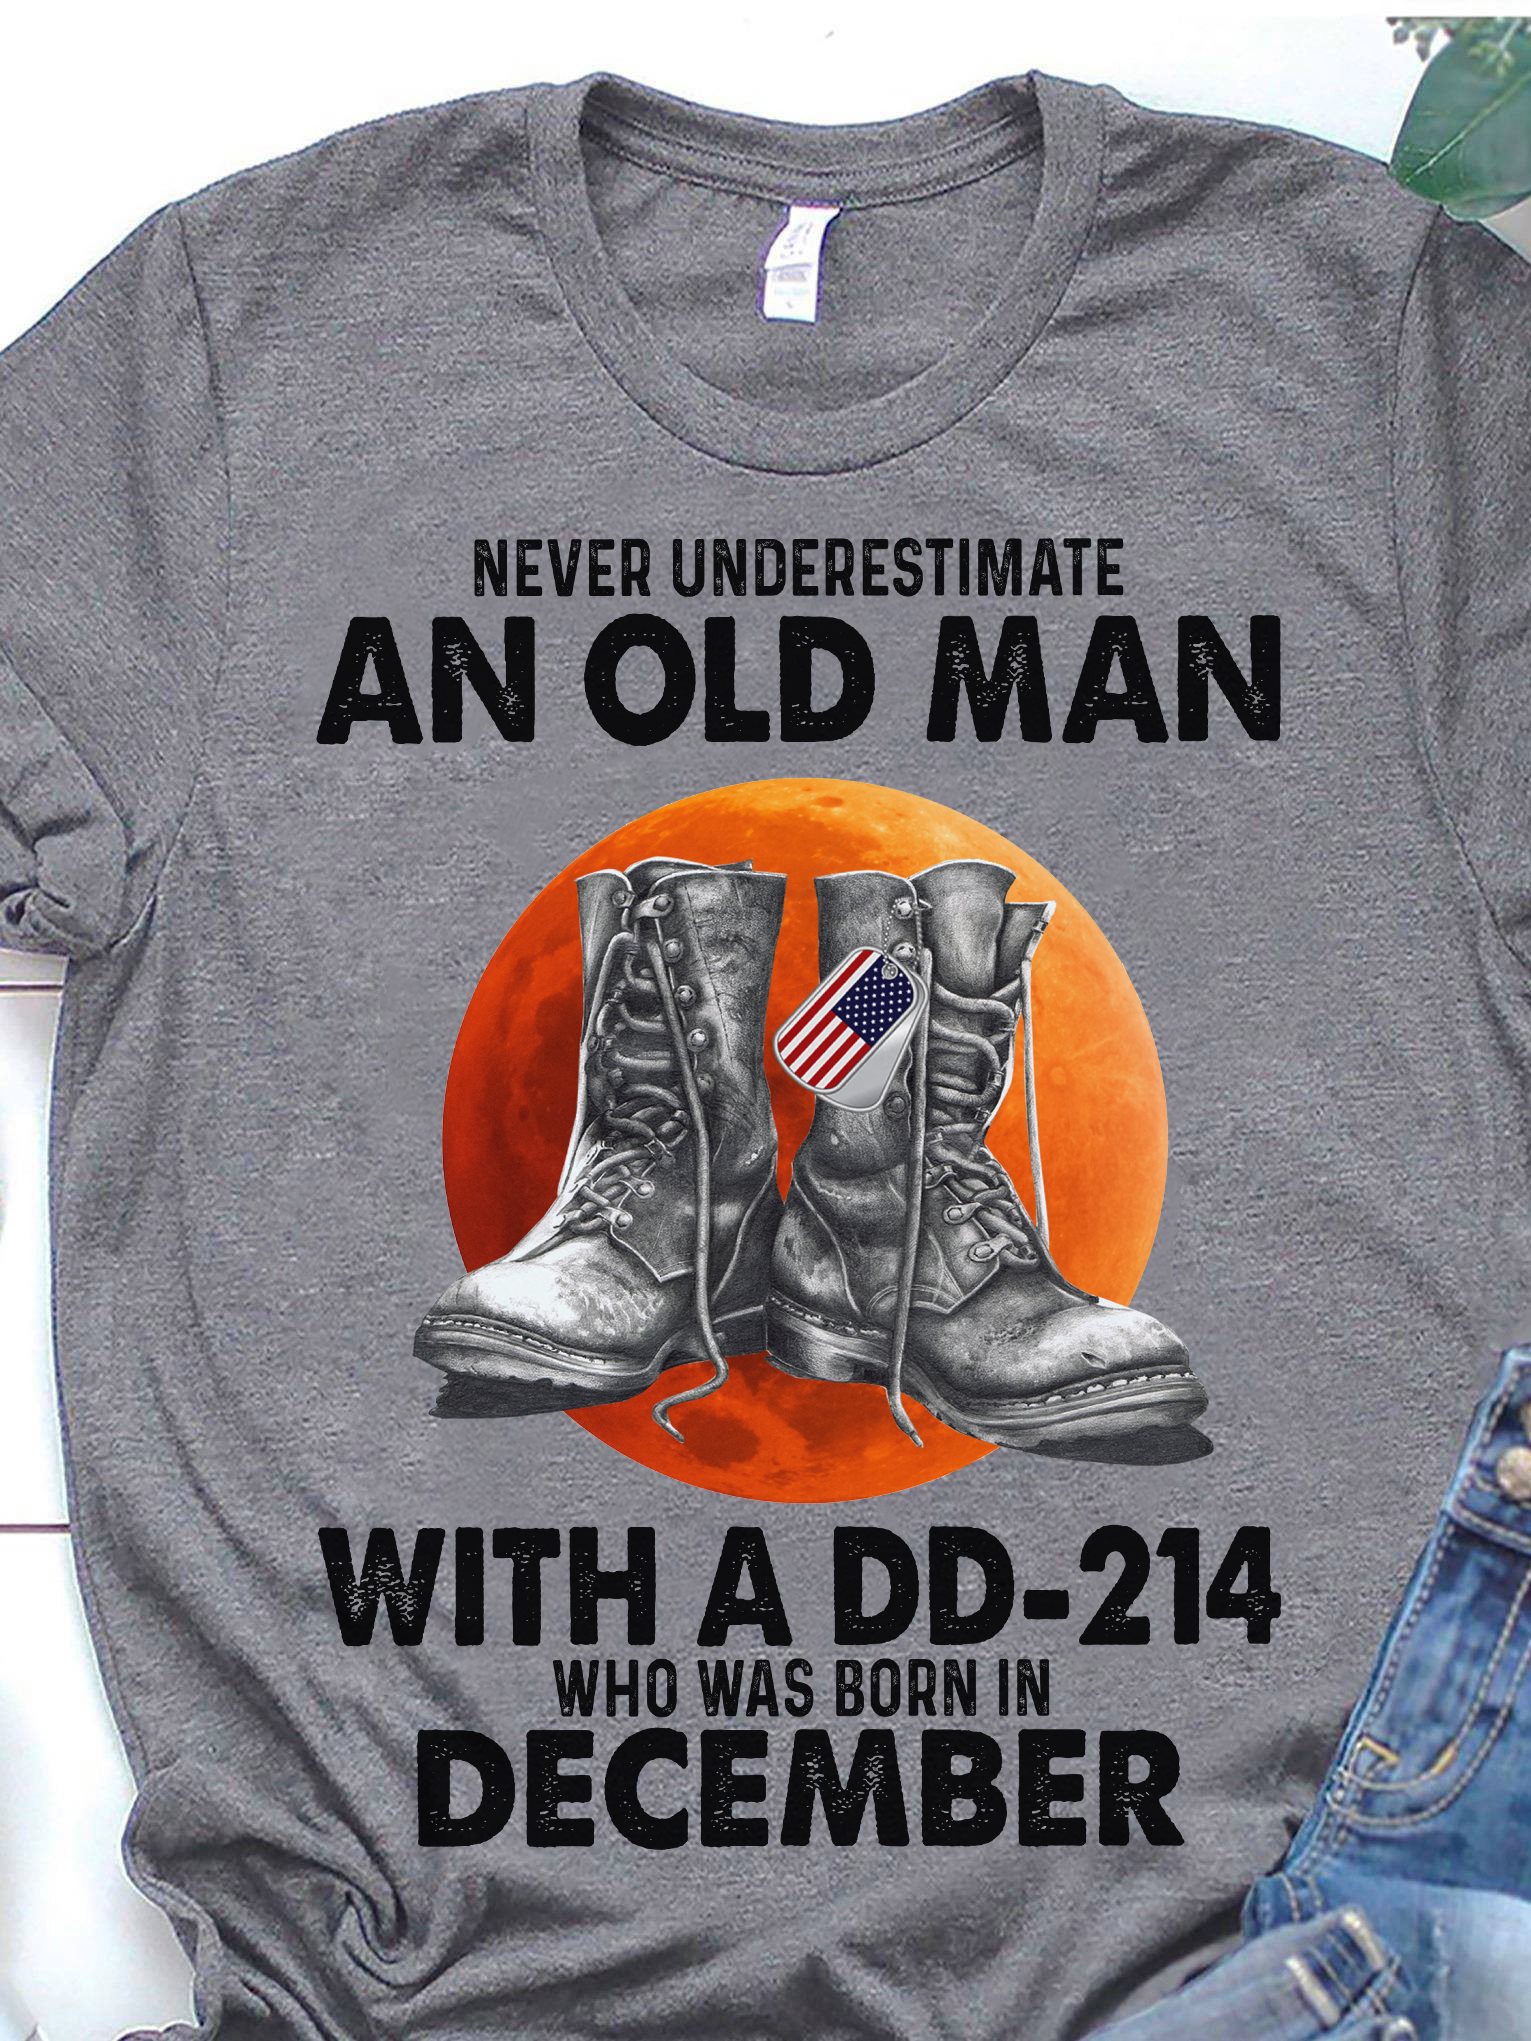 Never underestimate an old man with a dd-214 who was born in December